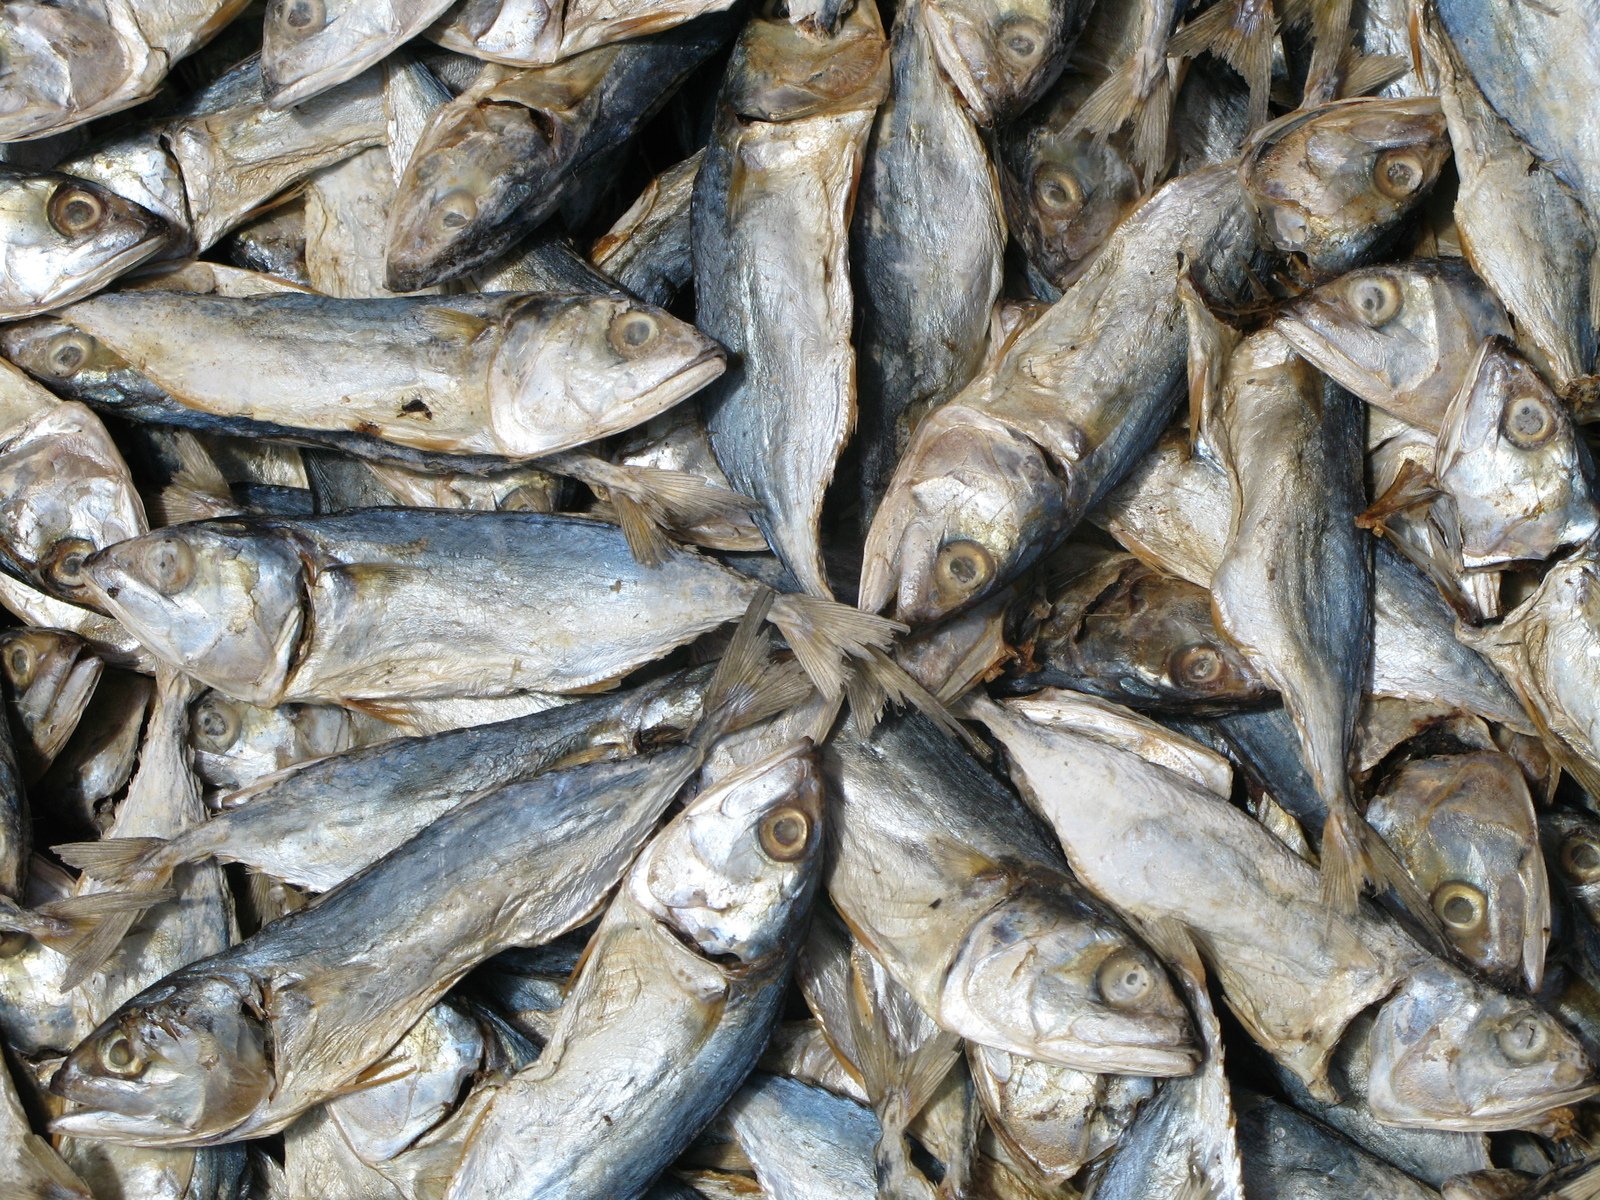 an image of a pile of fish on the market floor